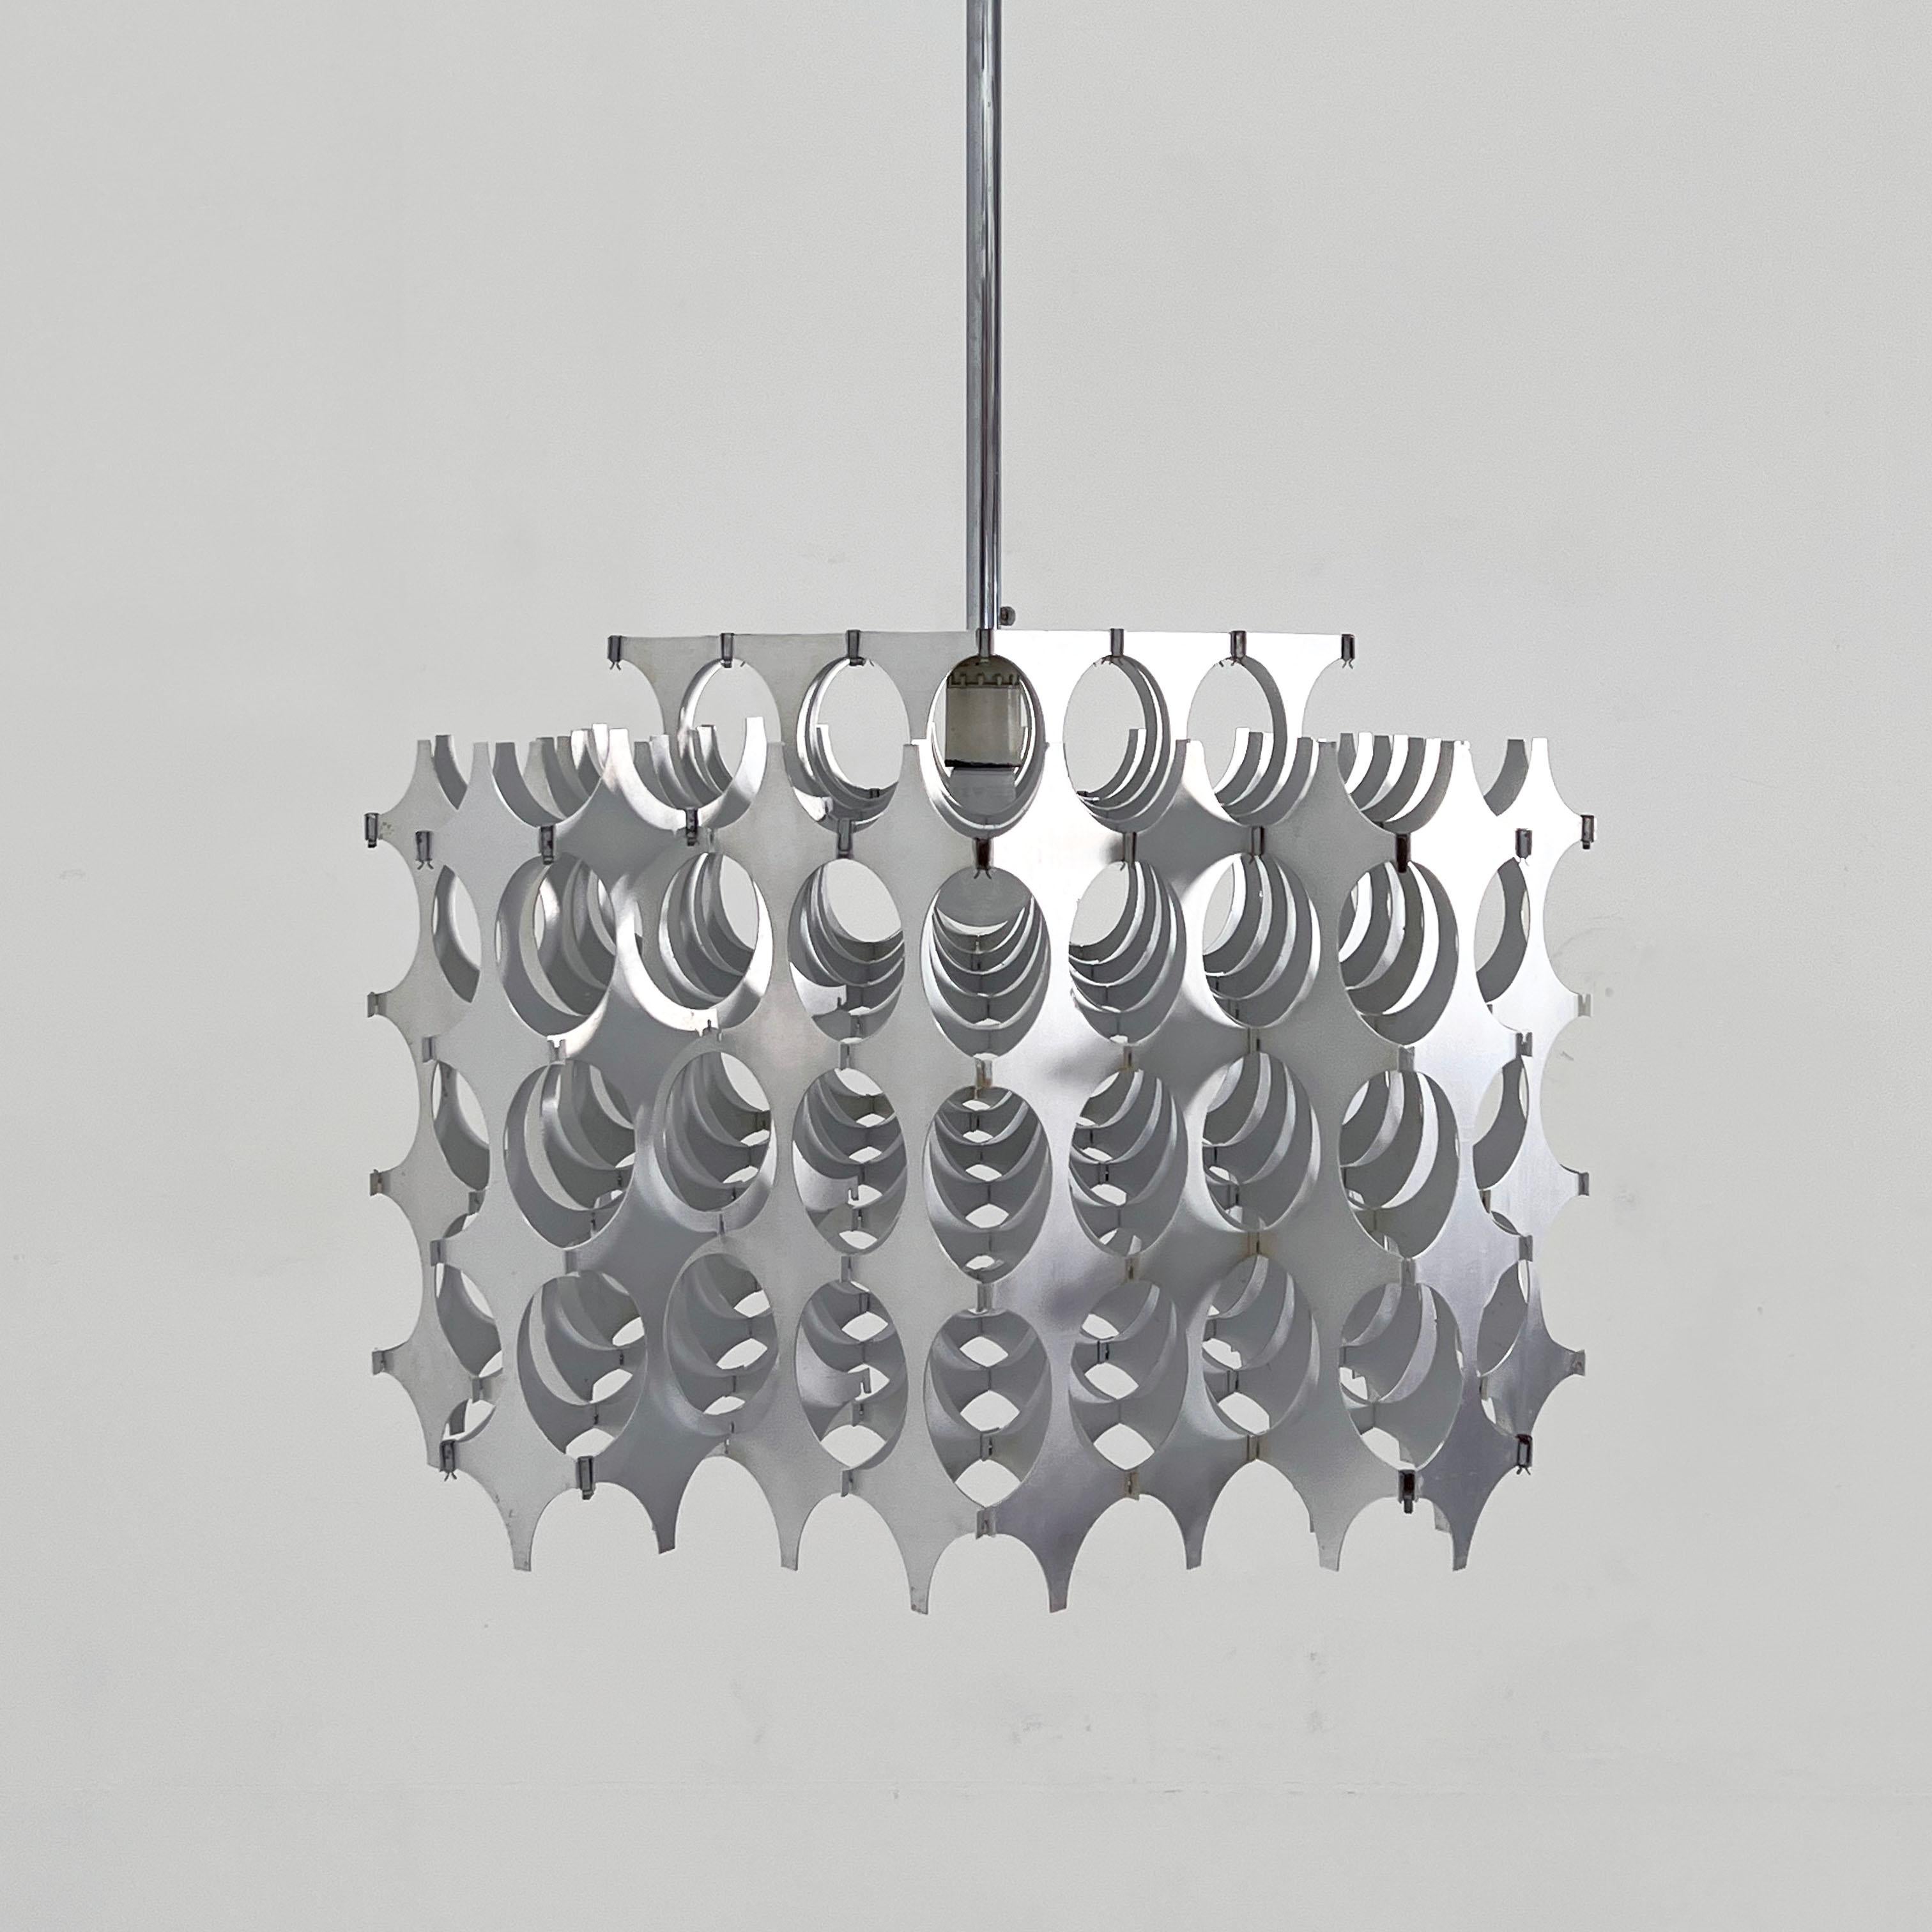 Mid-20th Century Cynthia Pendant Light by Mario Marenco for Artemide, 1960s For Sale